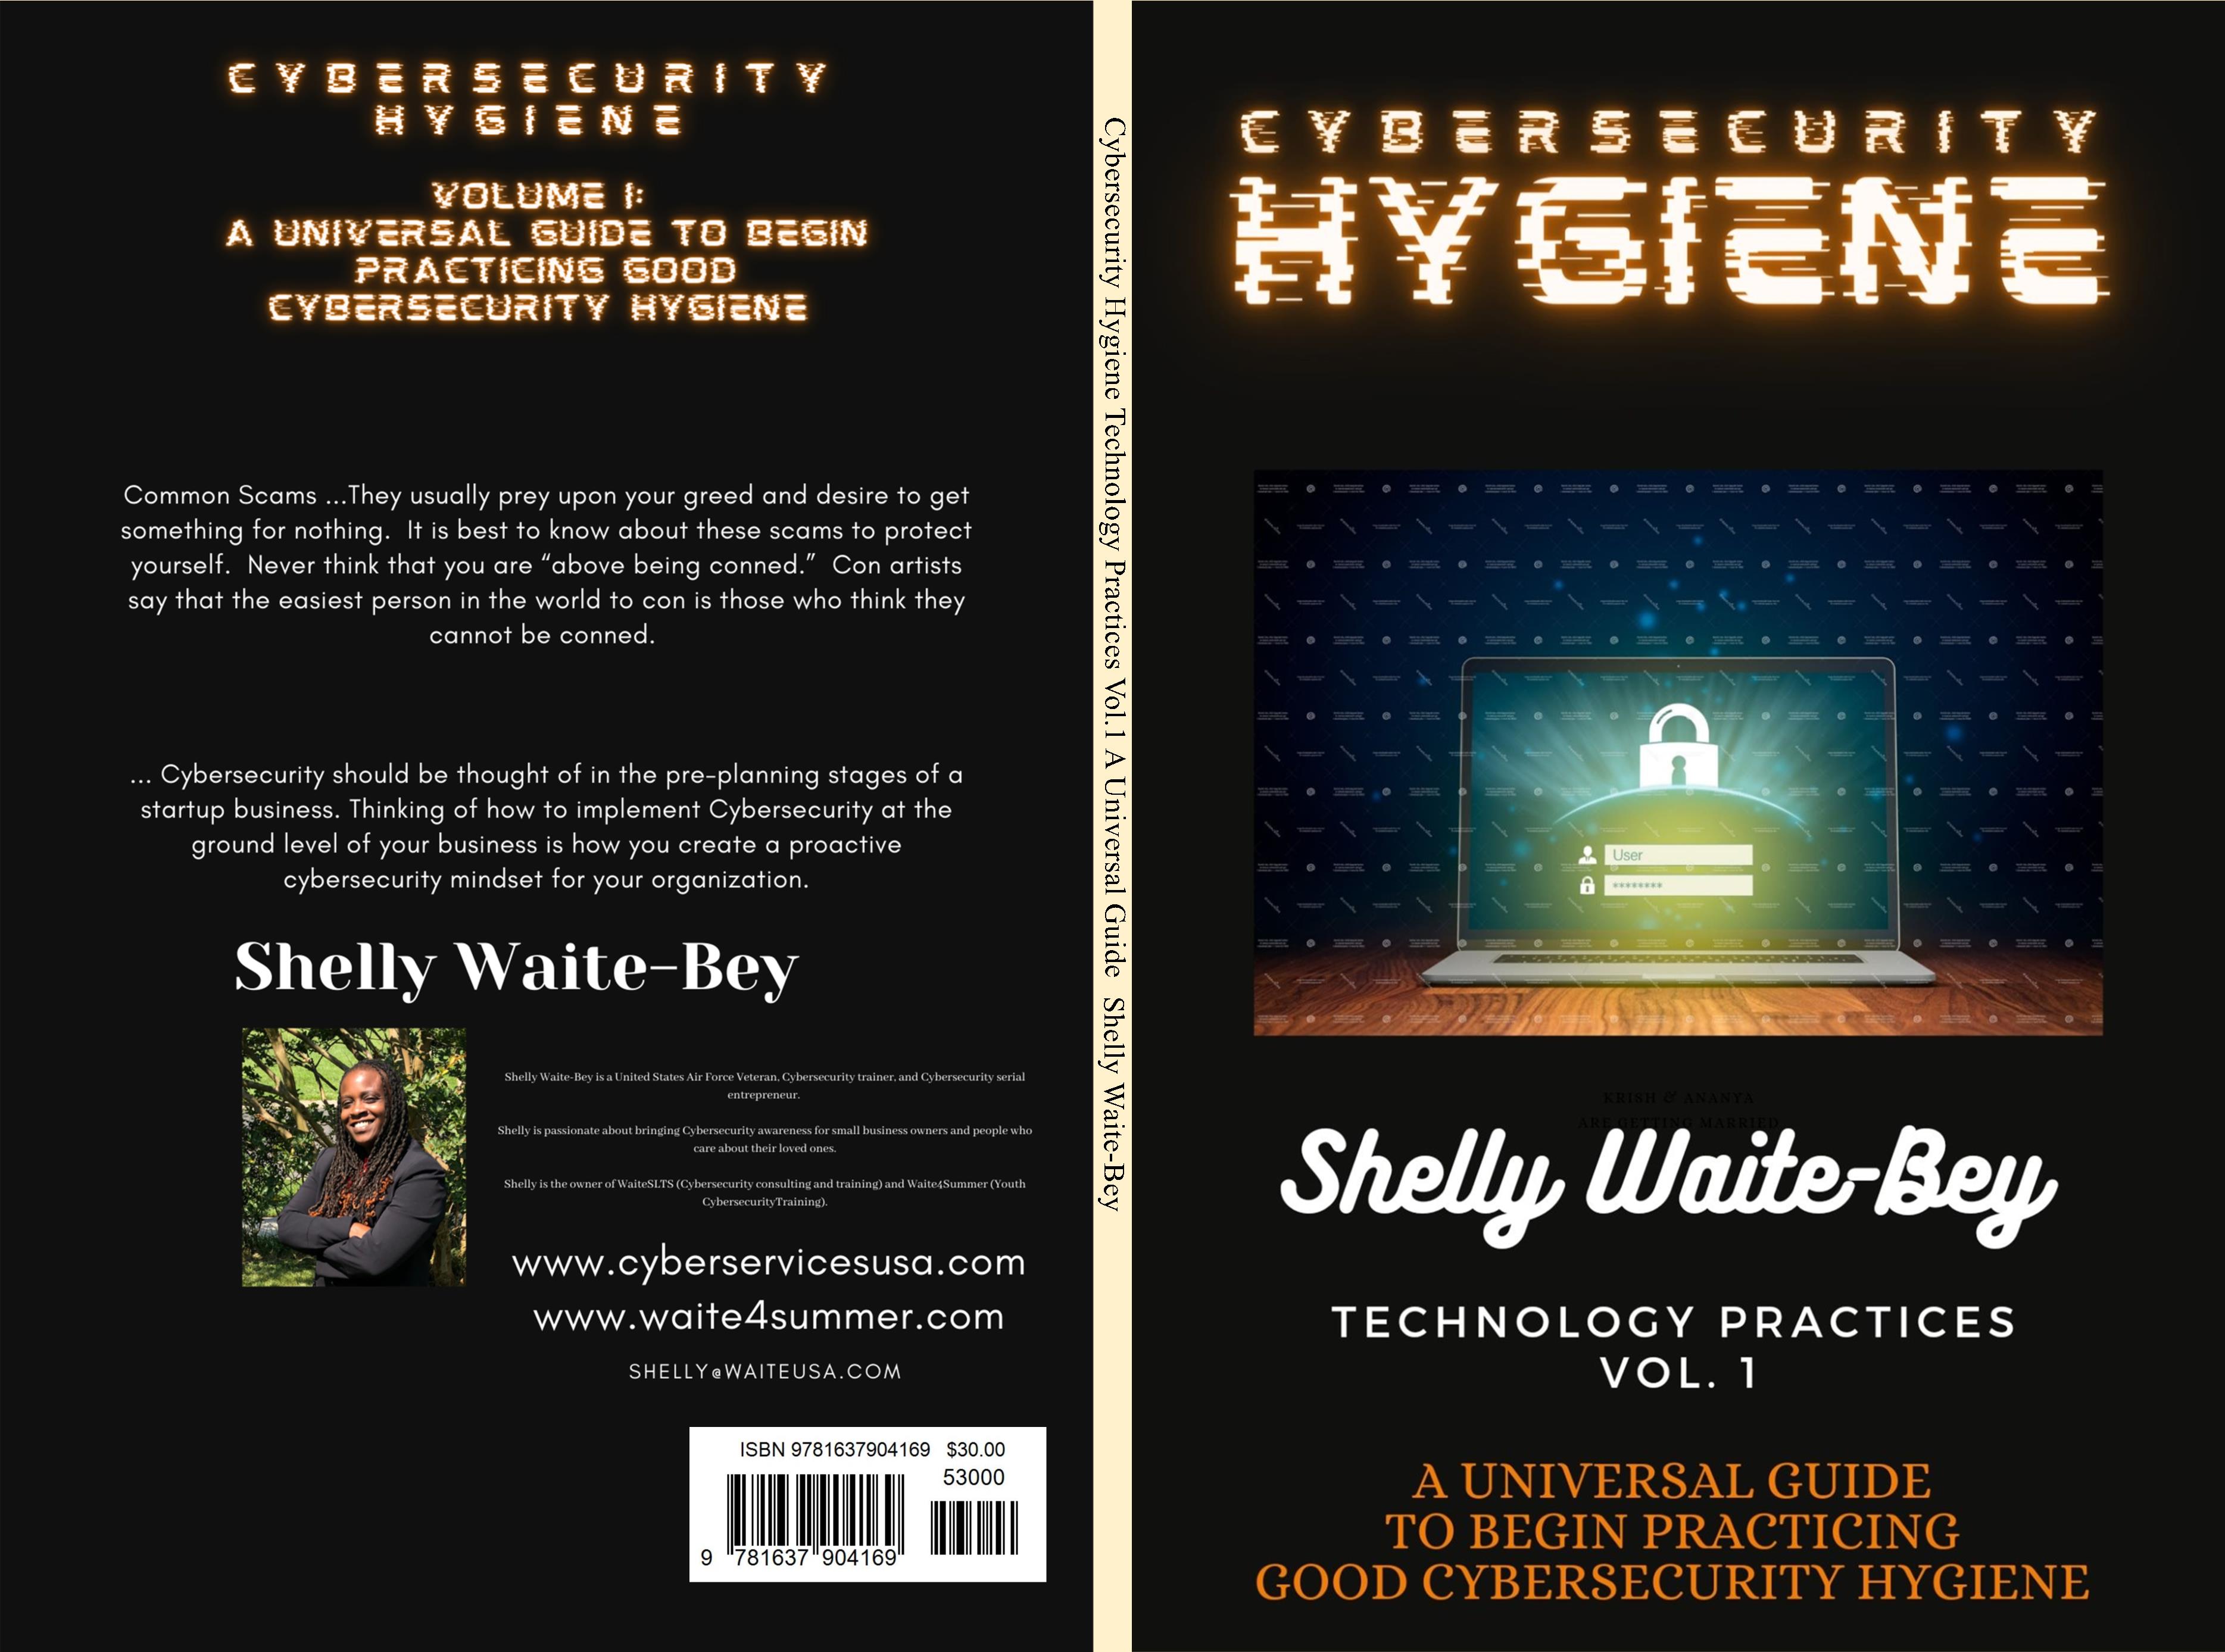 Cybersecurity Hygiene Technology Practices Vol.1 A Universal Guide to Begin Practicing Good Cybersecurity Hygiene cover image